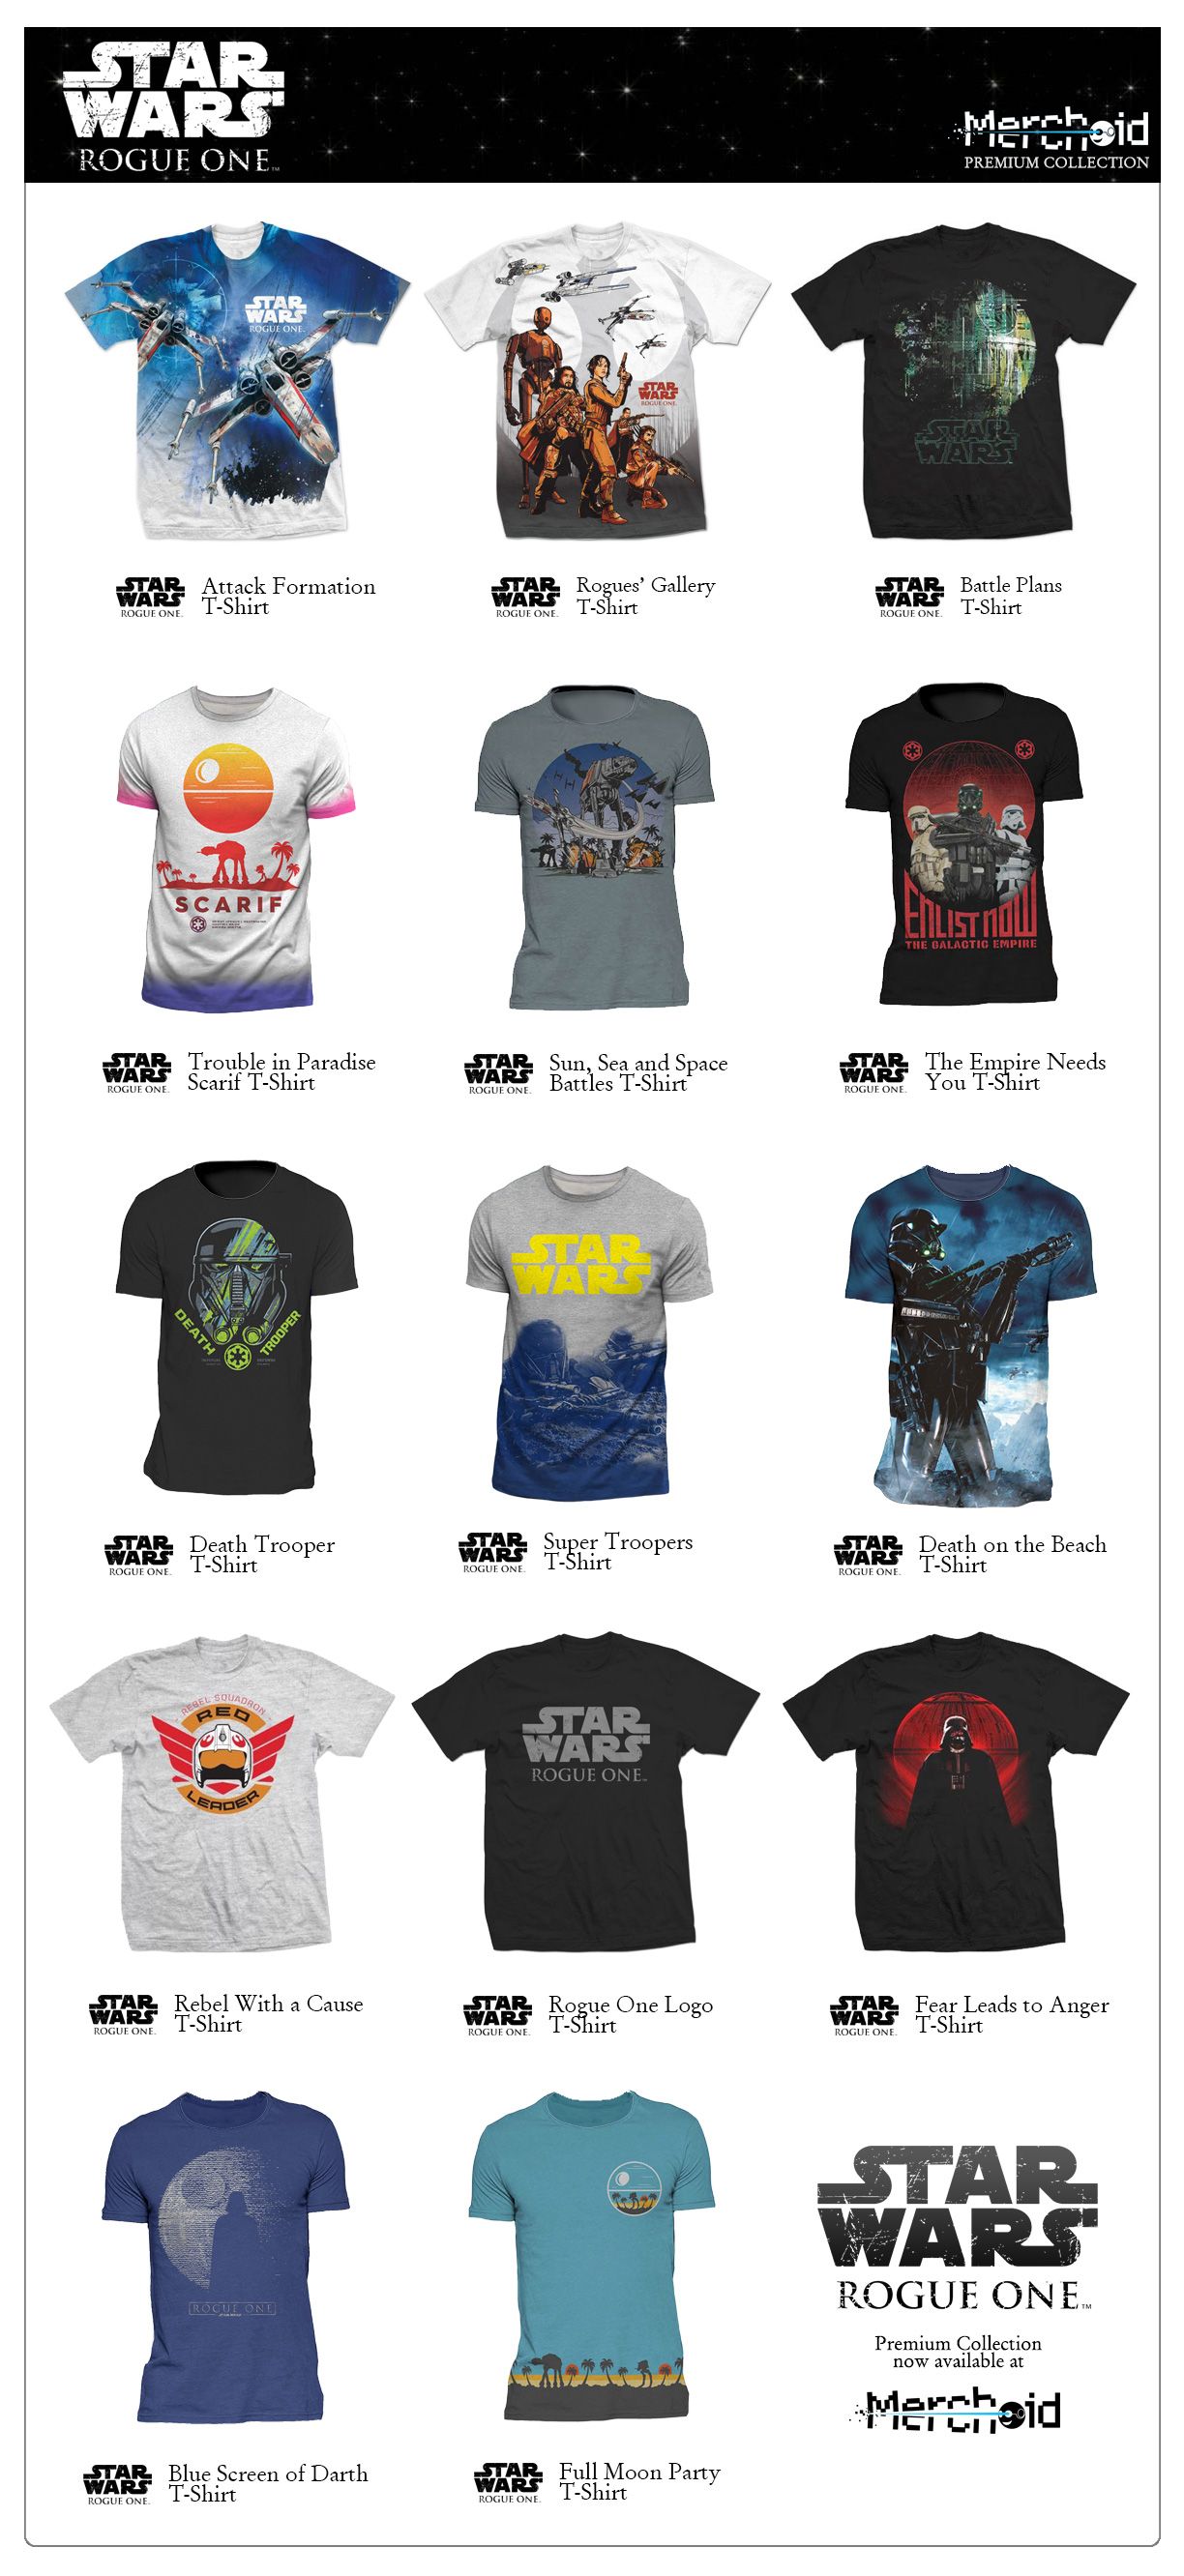 Full line of Merchoid Rogue One shirts